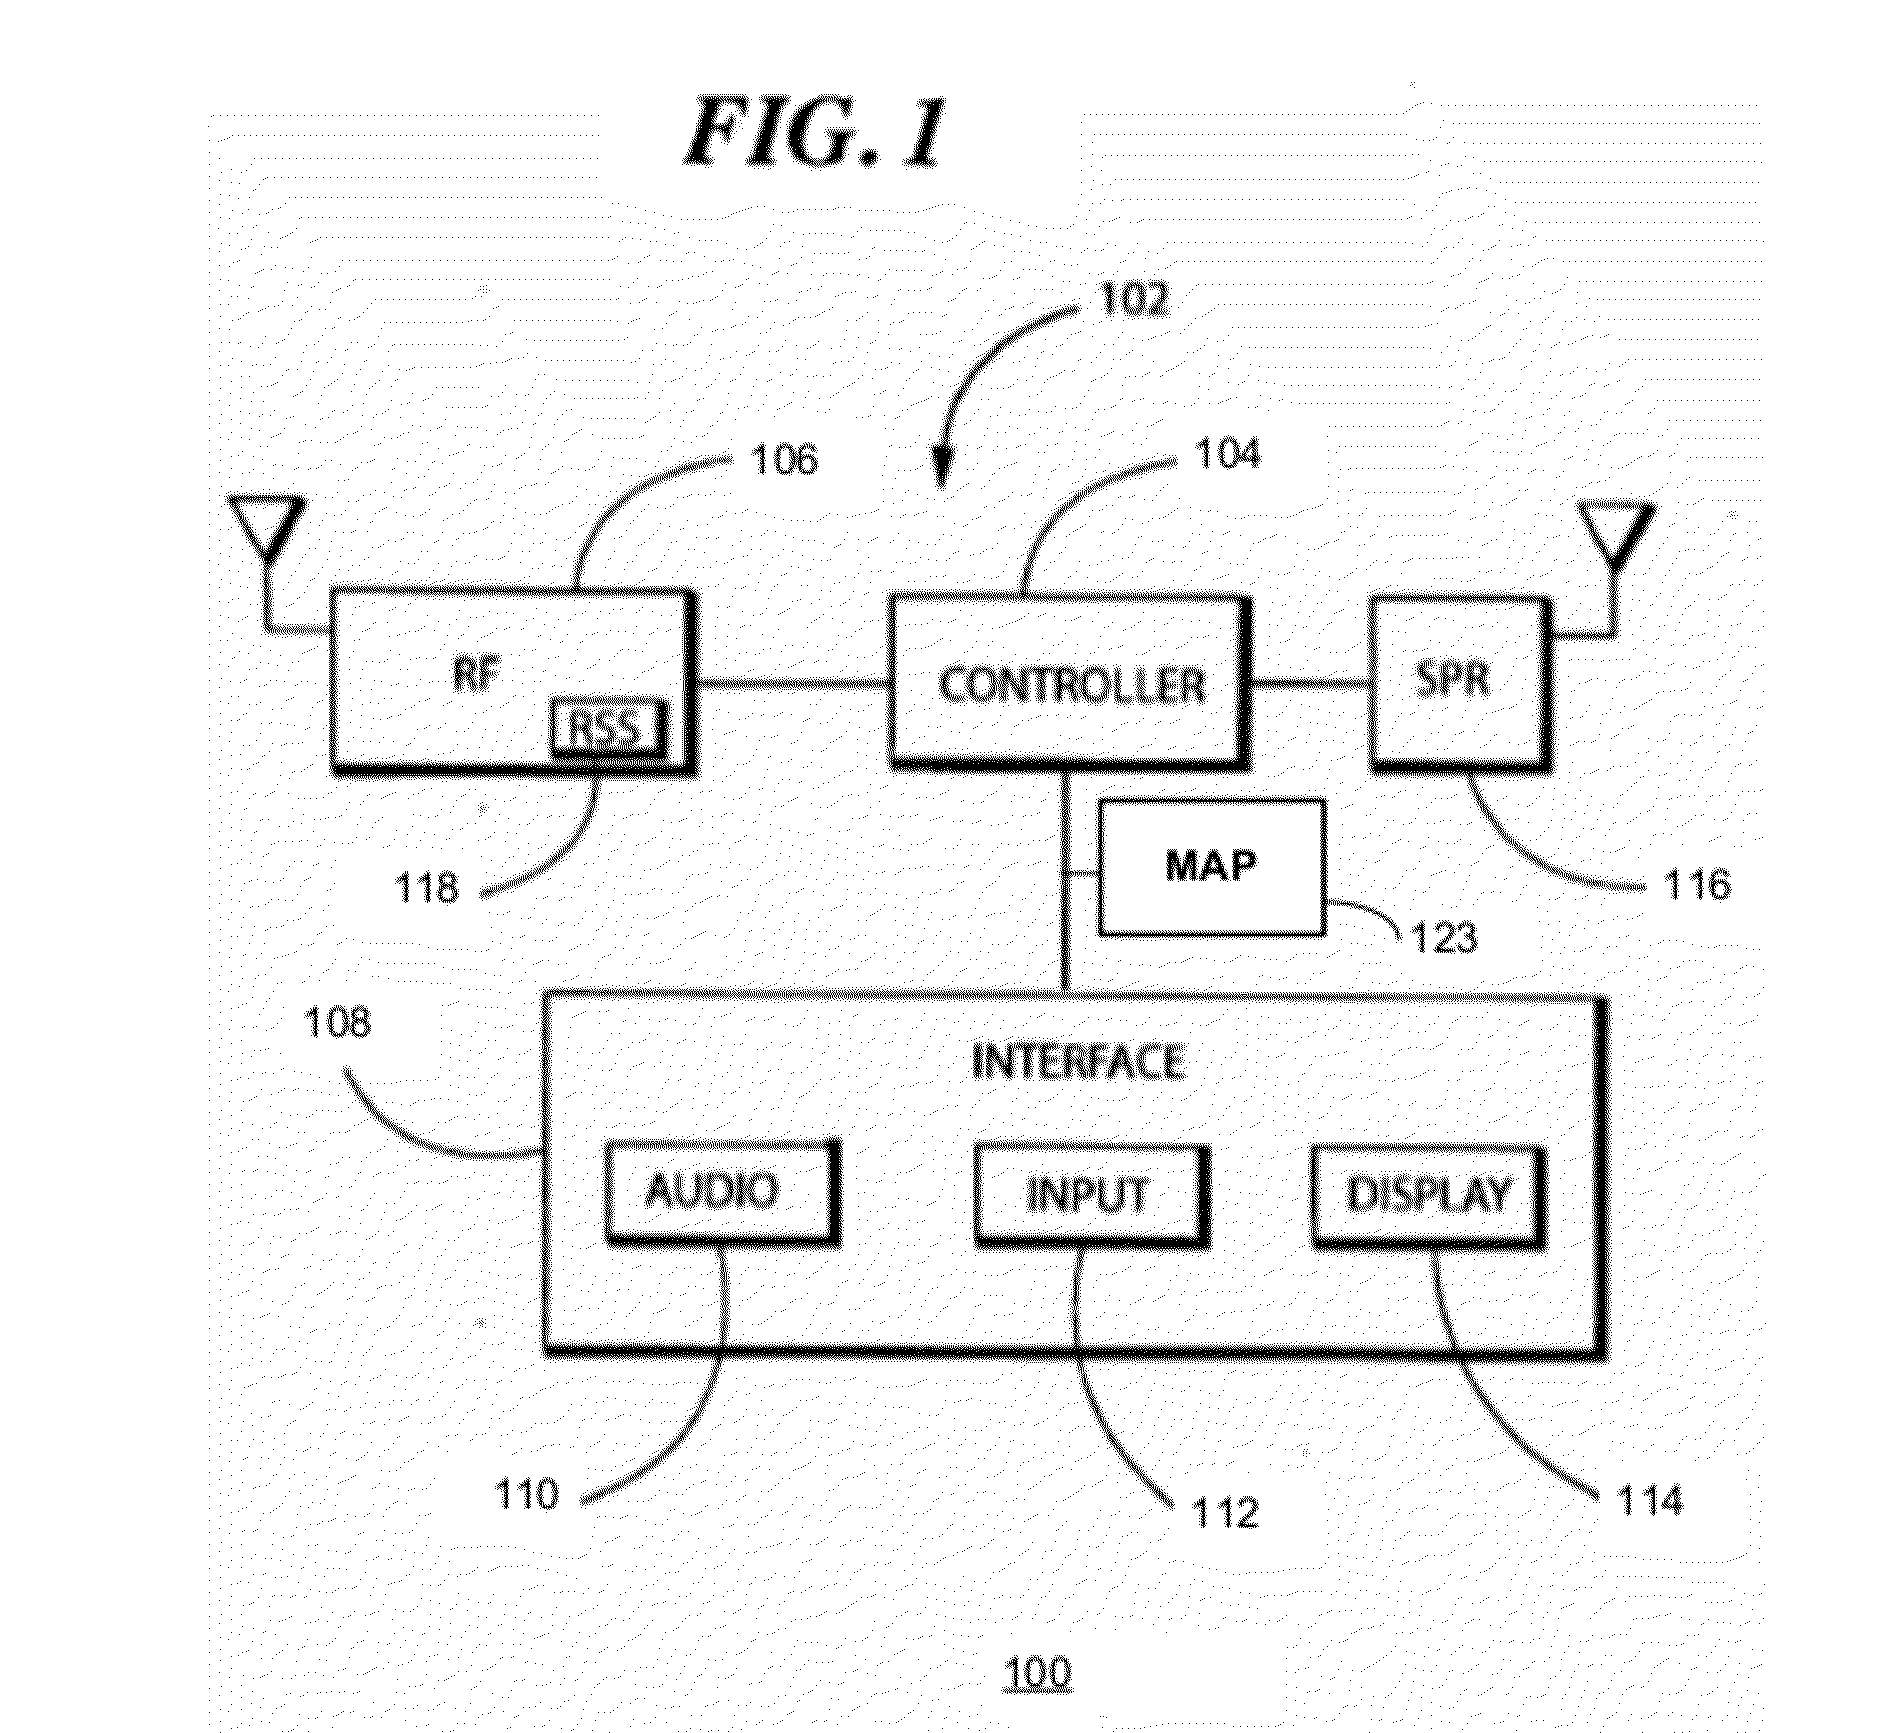 Systems and methods for selectively invoking positioning systems for mobile device control applications using accelerometer measurements